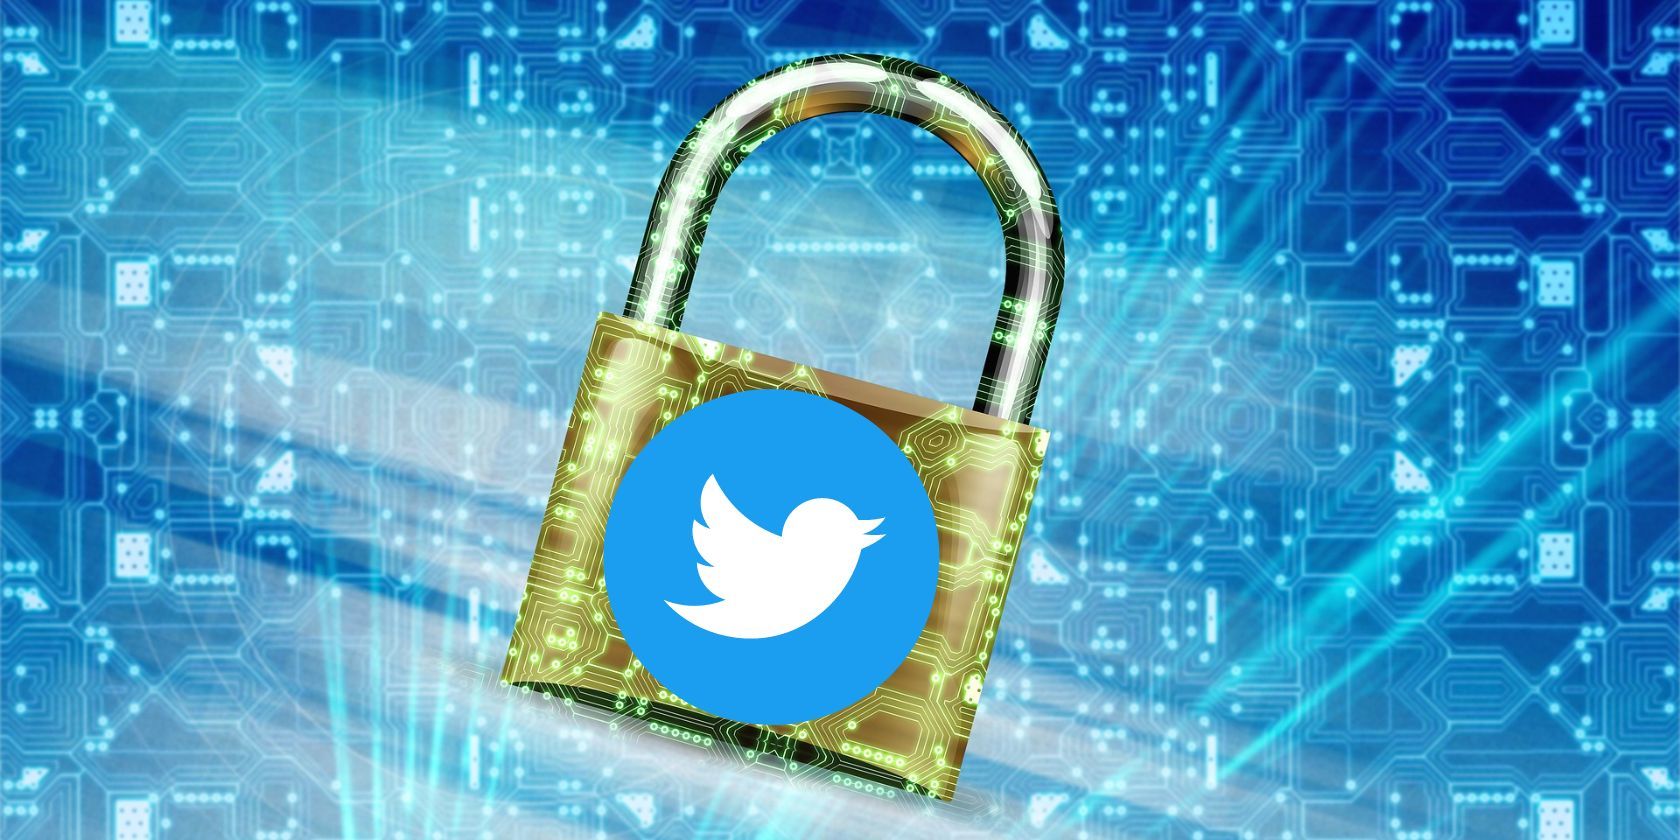 A padlock with the Twitter logo superimposed on it